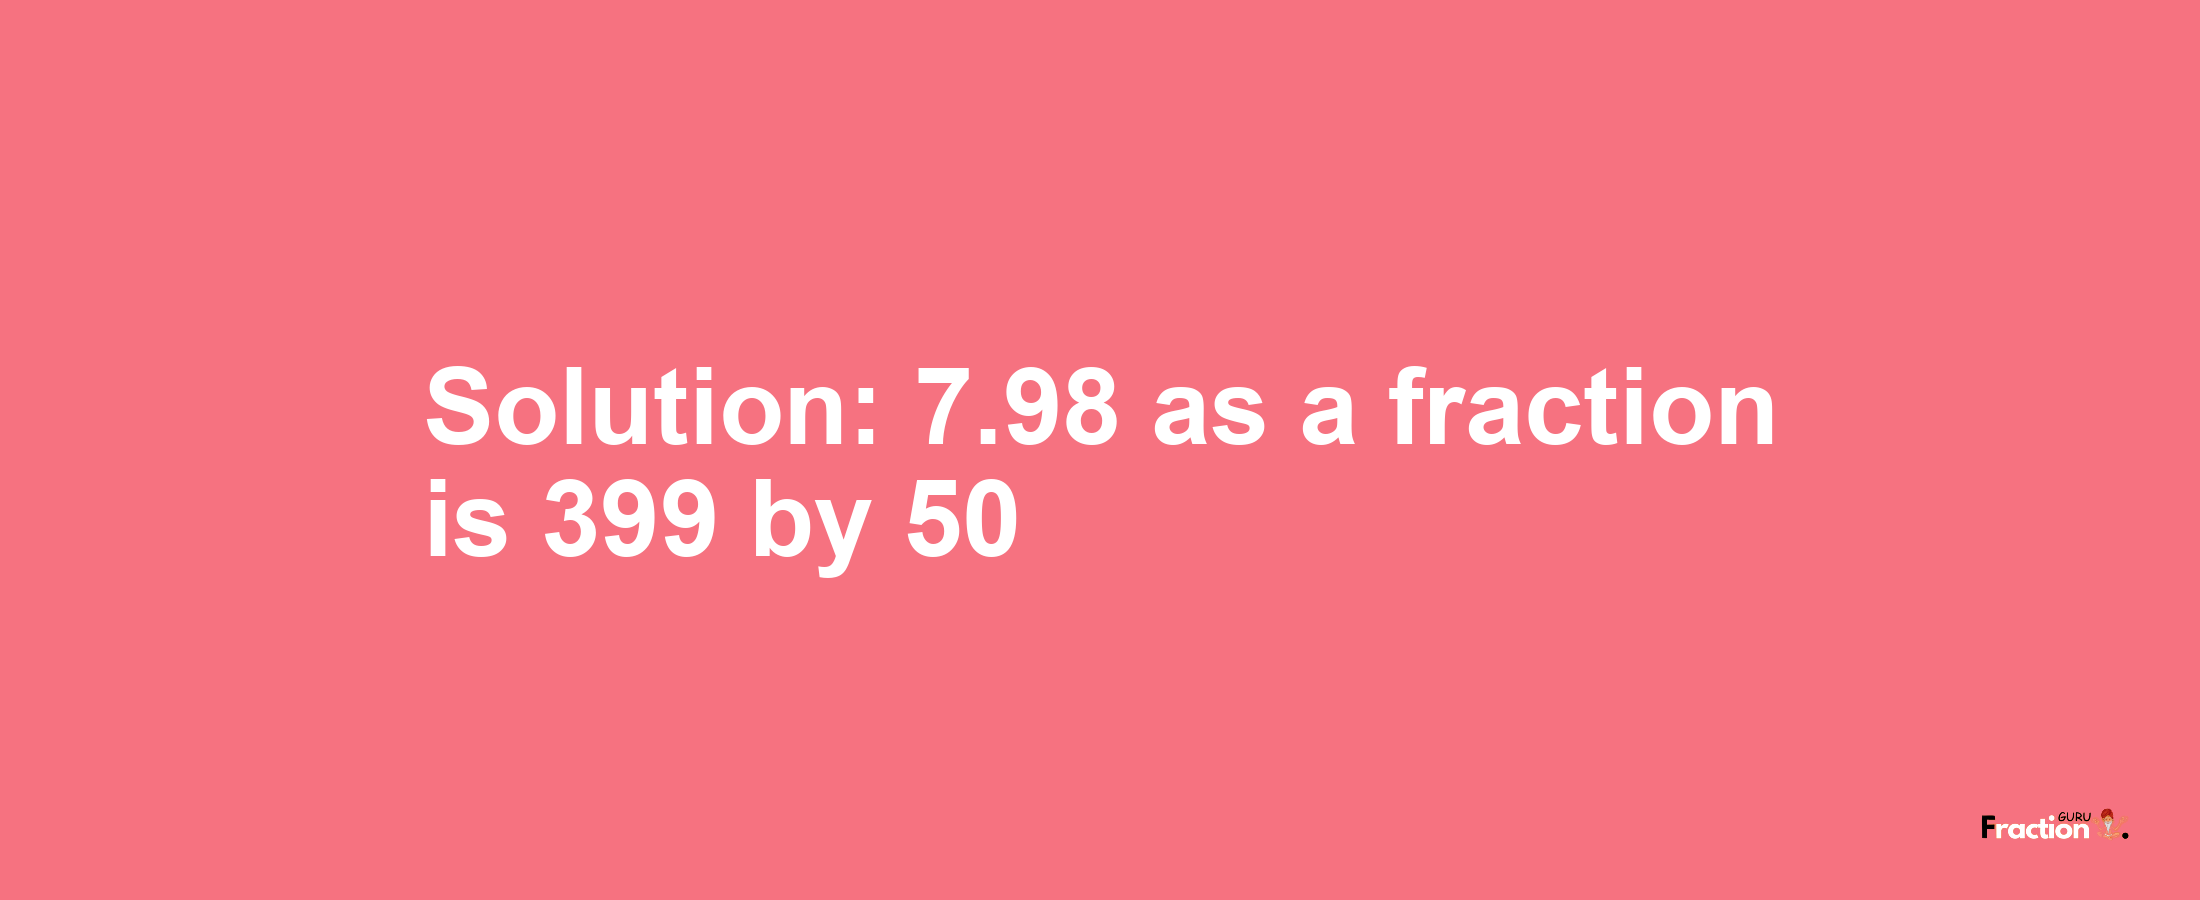 Solution:7.98 as a fraction is 399/50